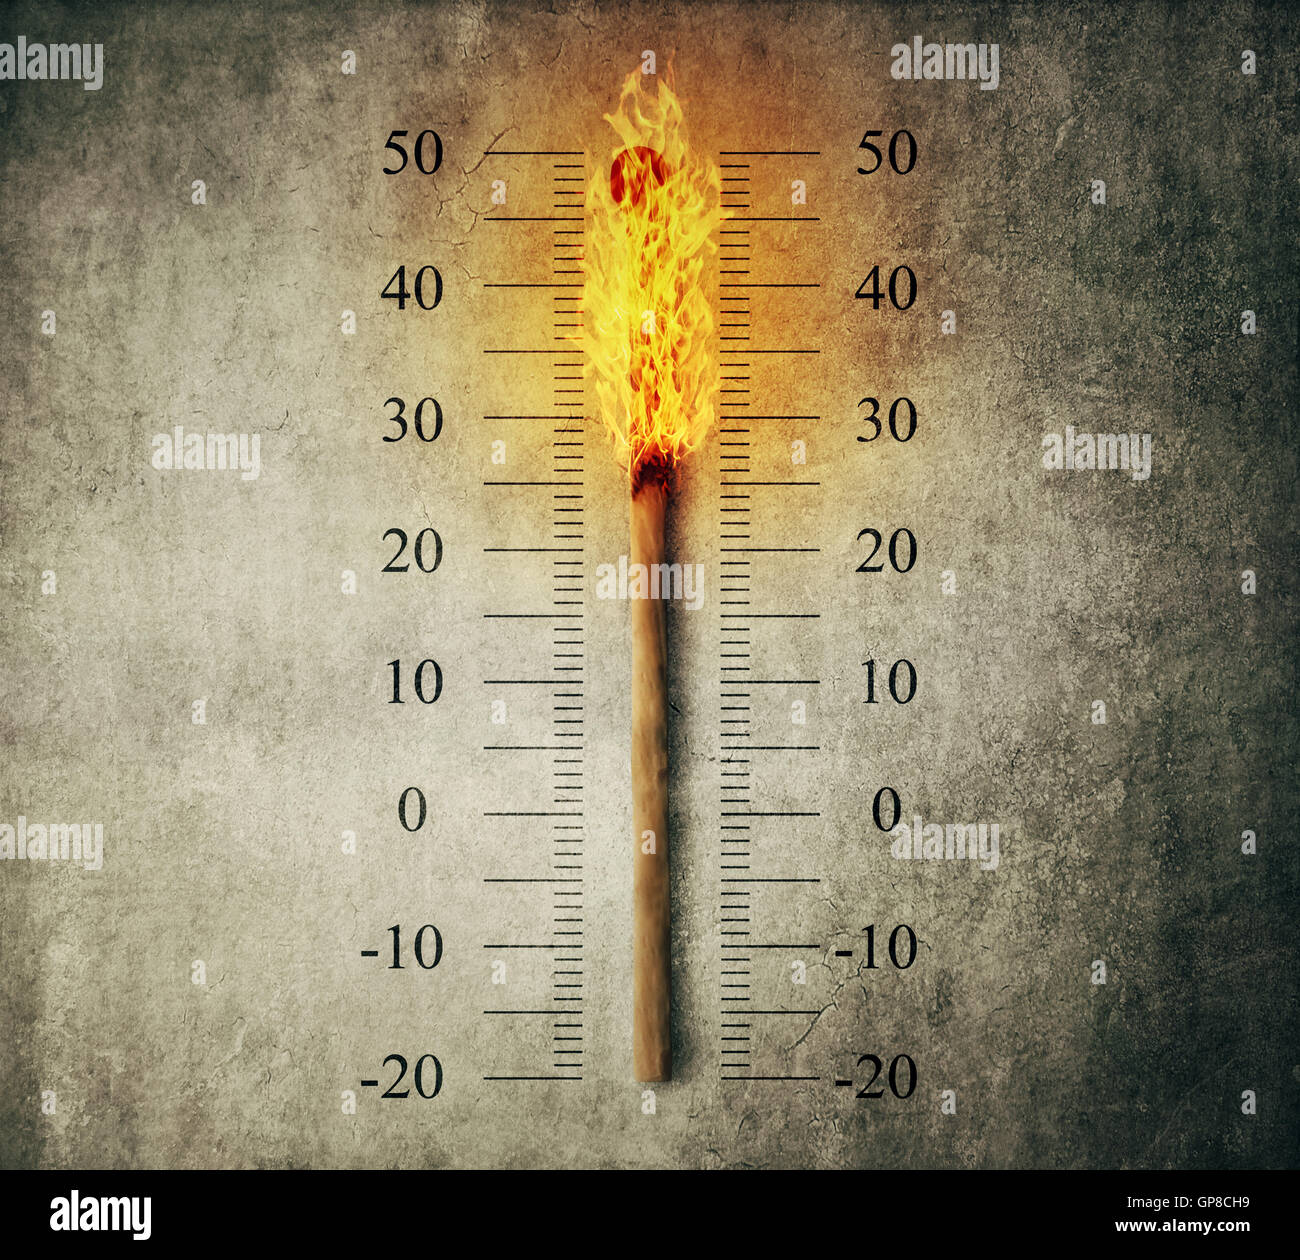 Burned match stick indicating temperature on a scale as a thermometer. Global warming and temperature rising concept Stock Photo